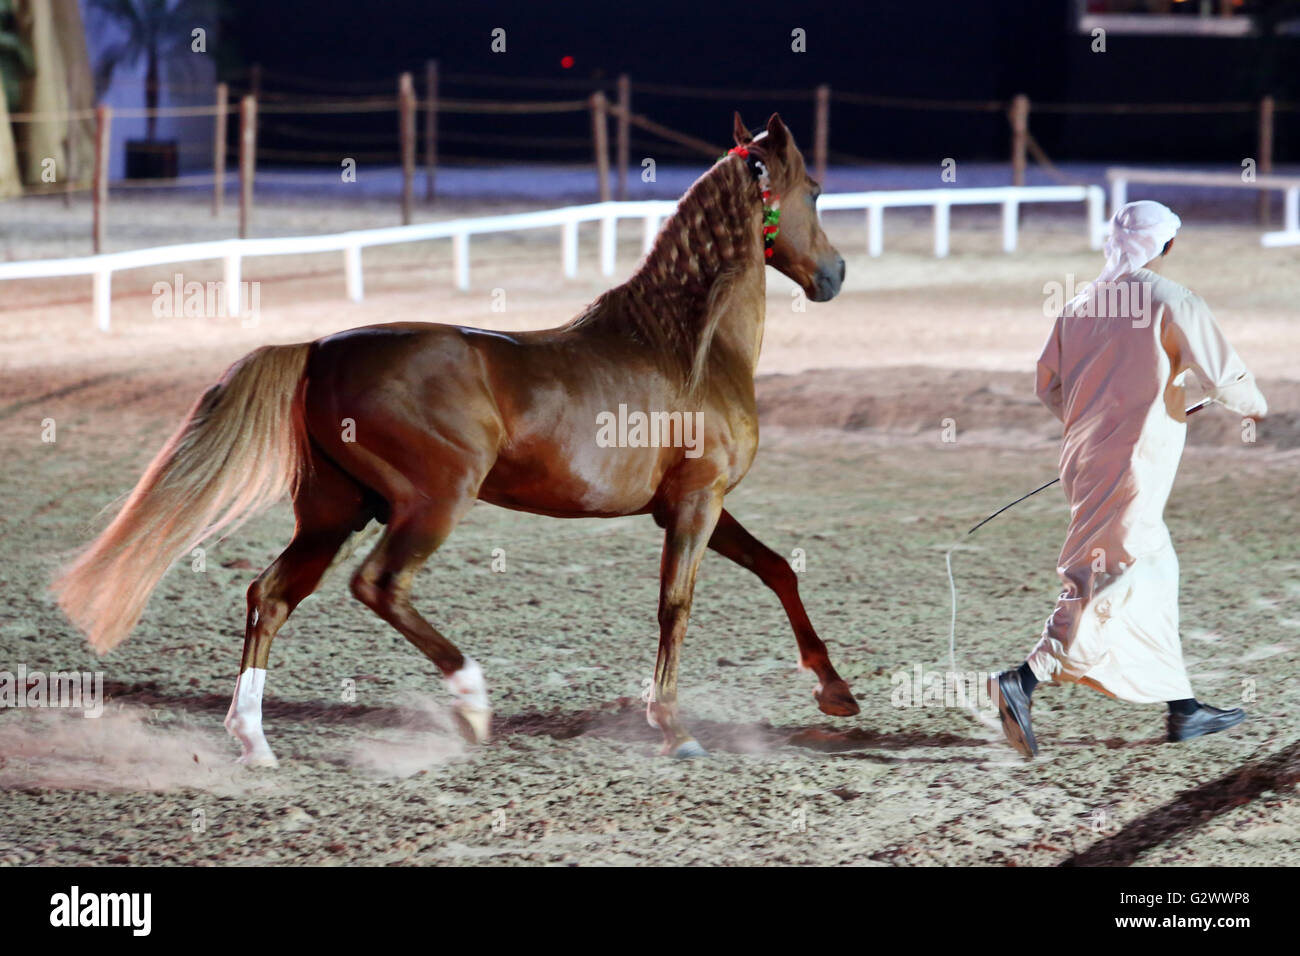 26.03.2015, Dubai , Dubai, United Arab Emirates - Free dressage, horse follows a man. 00S150326D162CAROEX.JPG - NOT for SALE in G E R M A N Y, A U S T R I A, S W I T Z E R L A N D [MODEL RELEASE: NO, PROPERTY RELEASE: NO, (c) caro photo agency / Sorge, http://www.caro-images.com, info@carofoto.pl - Any use of this picture is subject to royalty!] Stock Photo